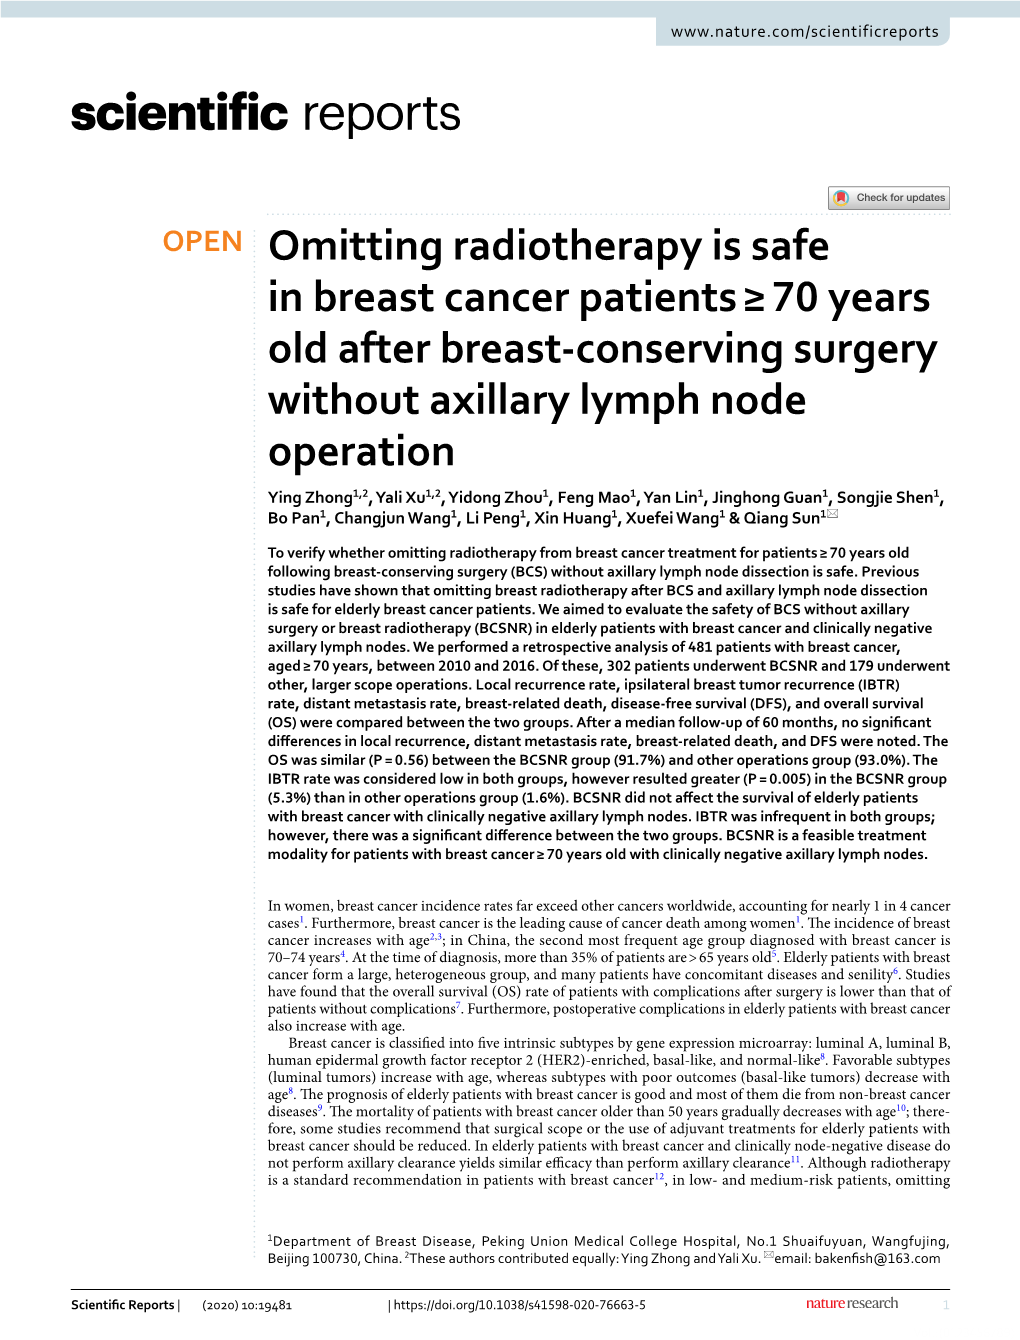 Omitting Radiotherapy Is Safe in Breast Cancer Patients ≥ 70 Years Old After